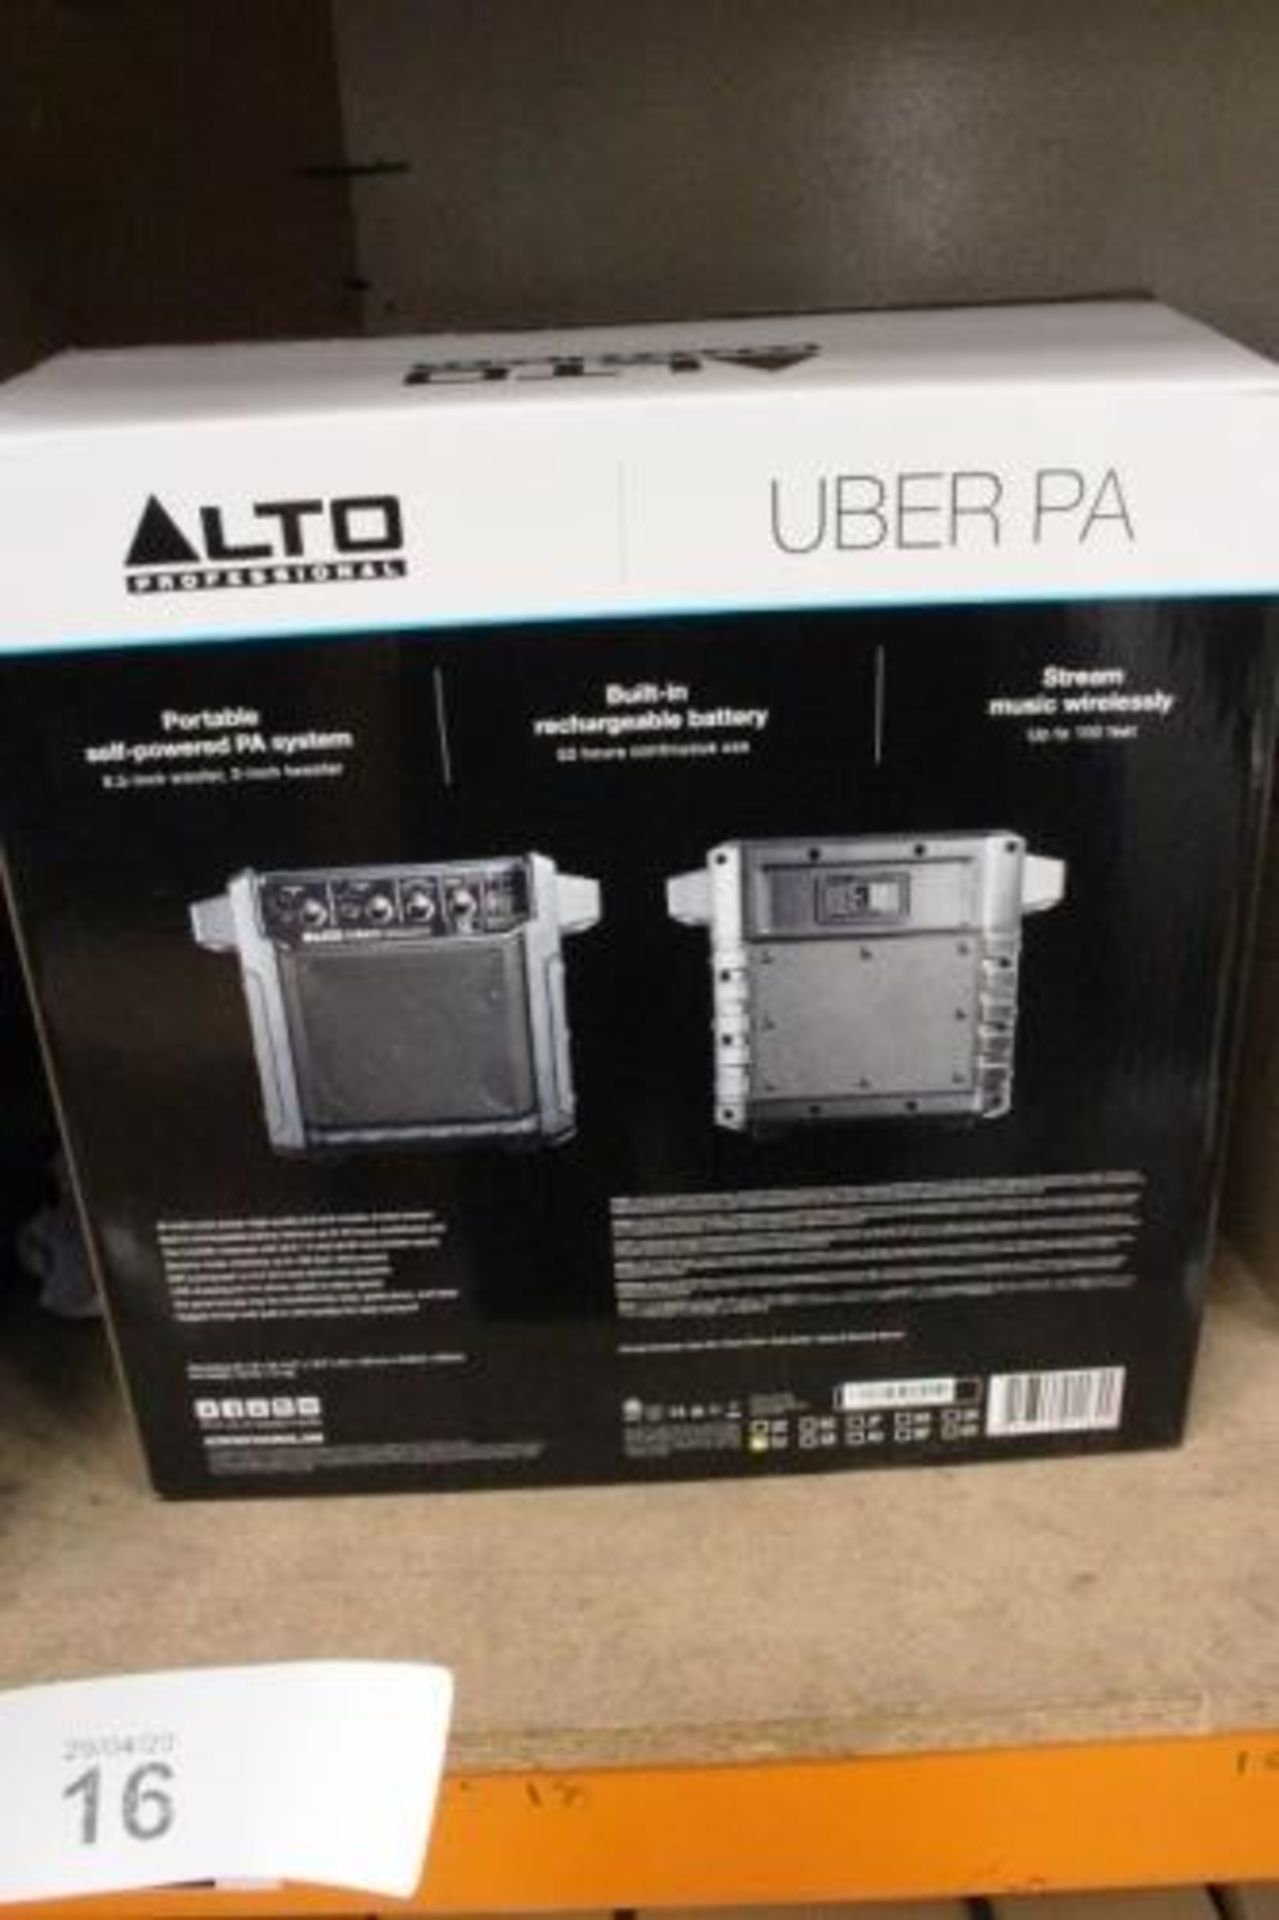 An Alto professional UBER portable PA system - New in box (ES1) - Image 2 of 2